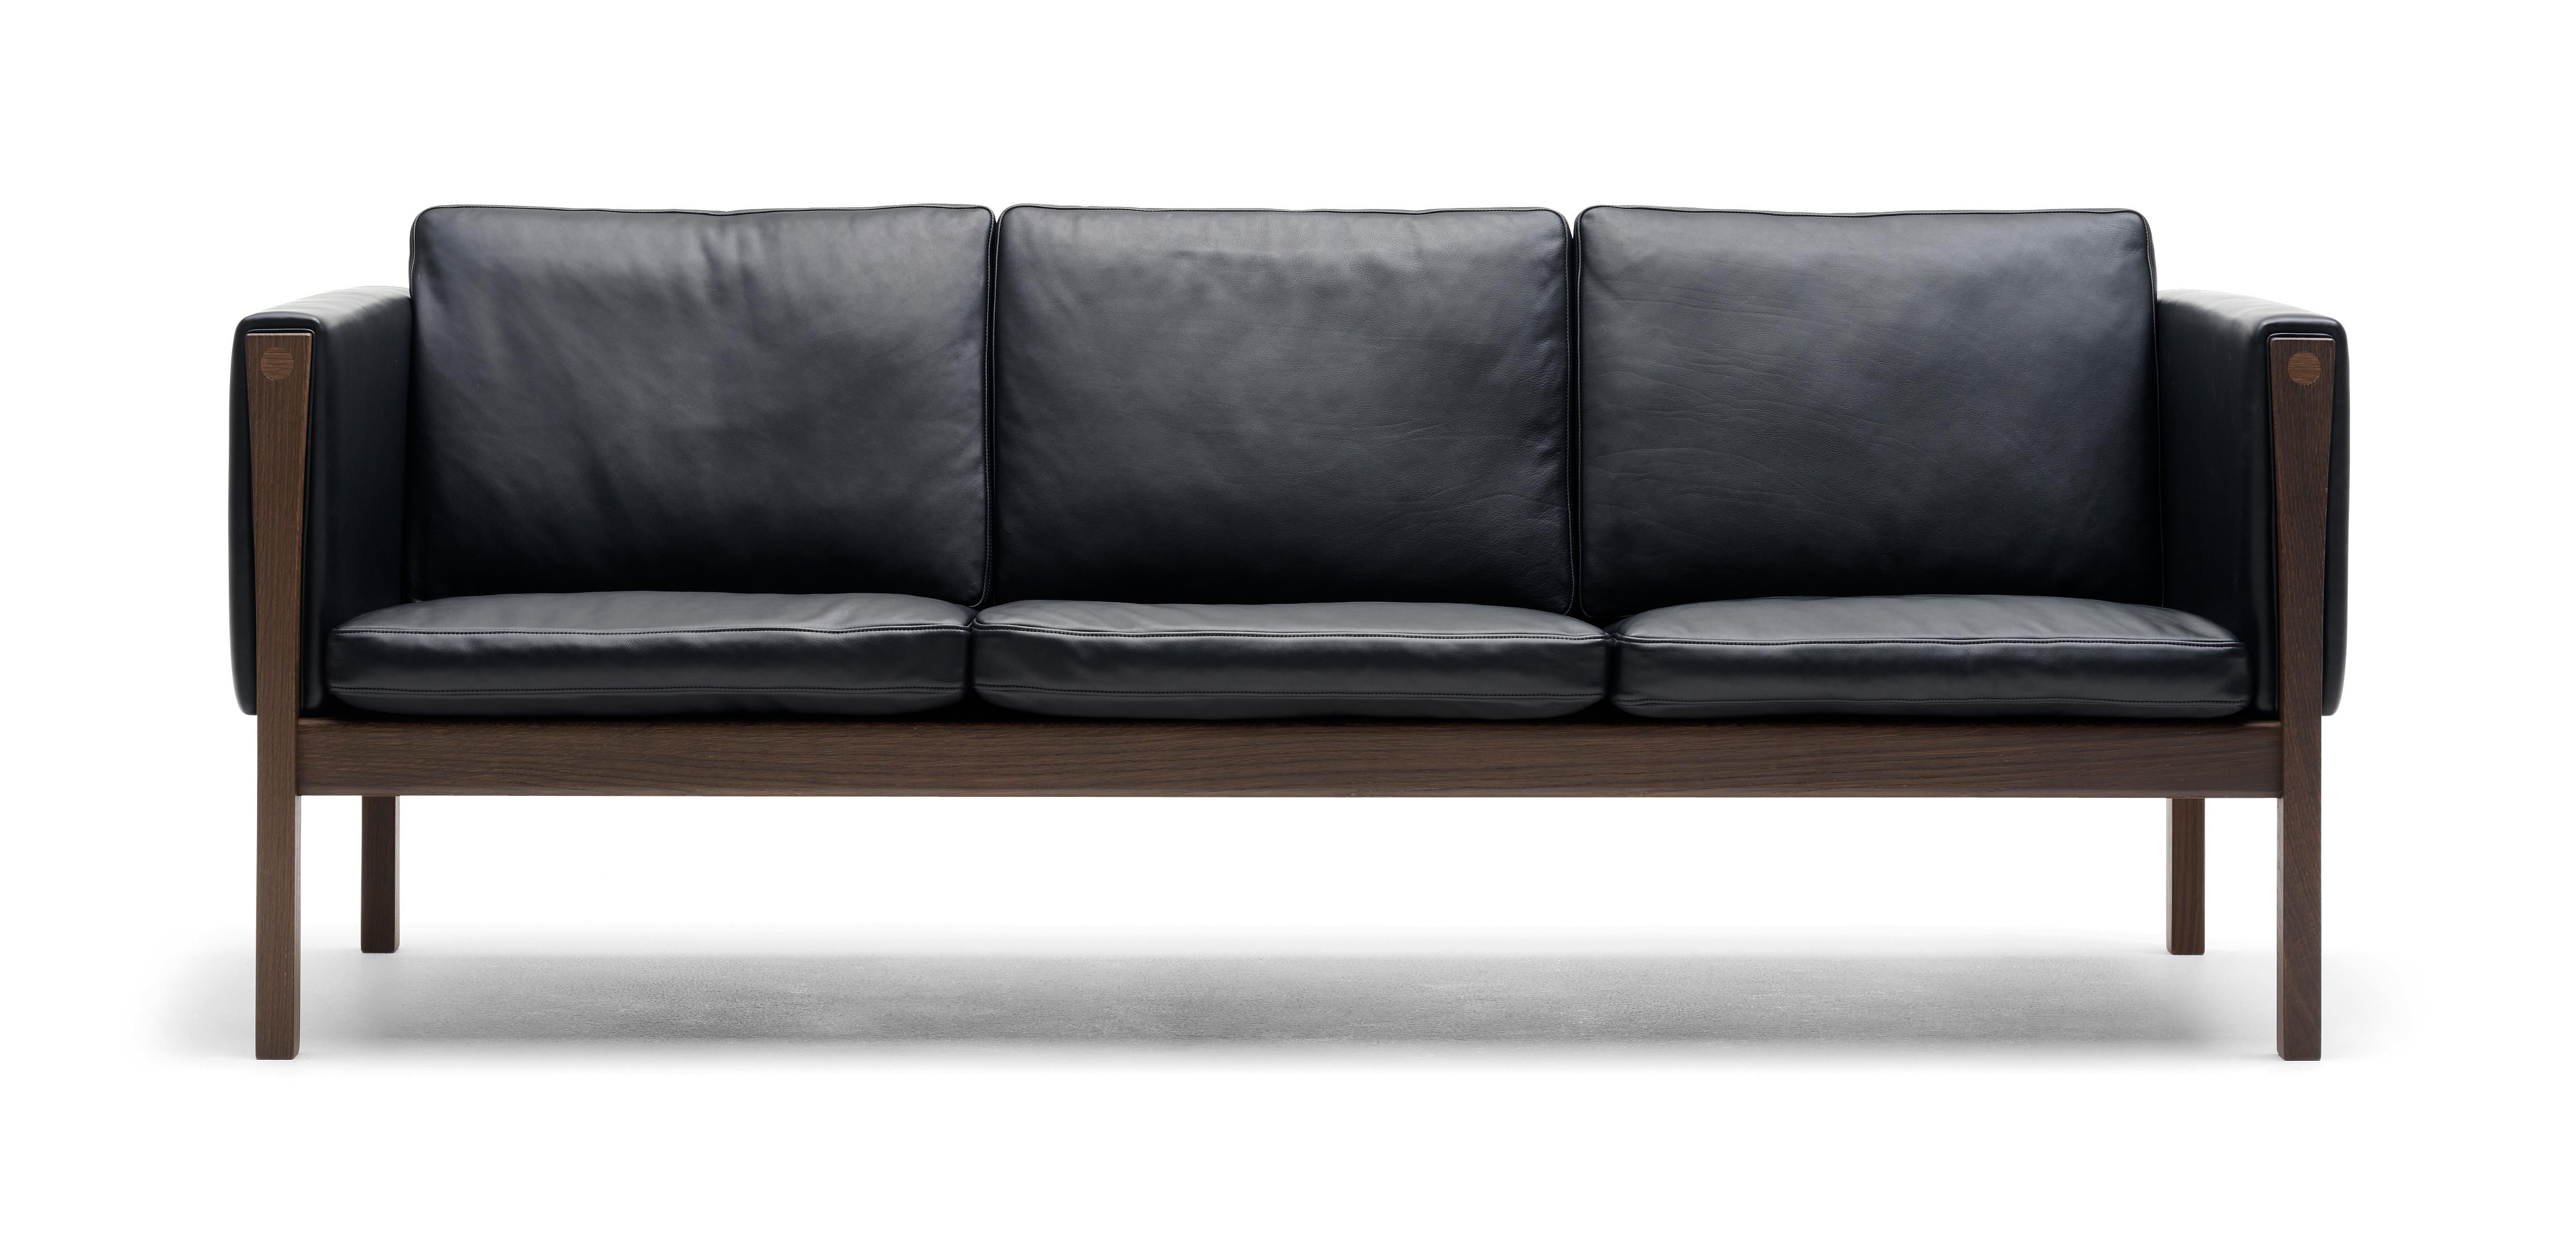 Black (Sif 98) CH163 Sofa in Walnut Oil Frame with Leather Upholstery by Hans J. Wegner